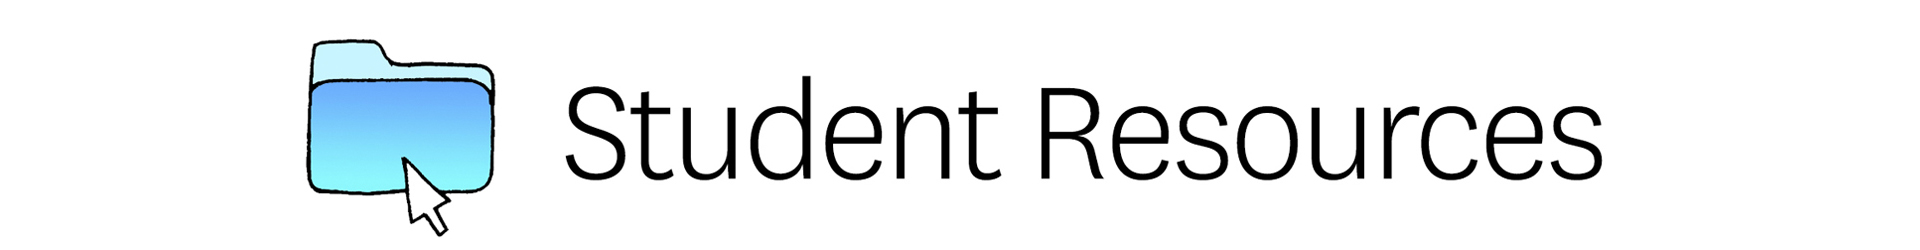 Graphic of a computer folder icon with a cursor mouse and text: "Student Resources"